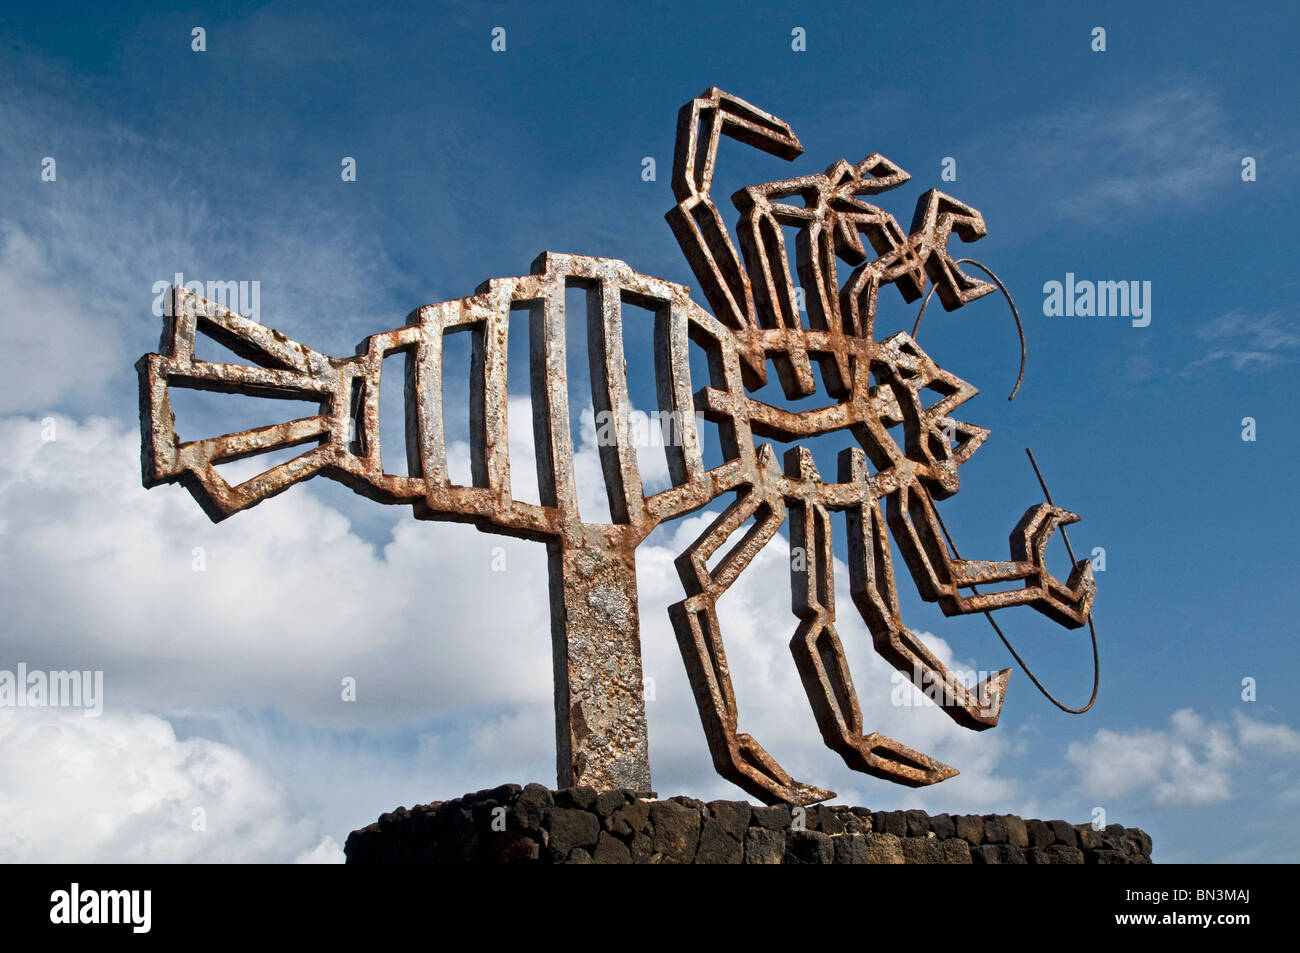 Work of art at Jameos del Agua, Lanzarote, Spain, low angle view Stock Photo